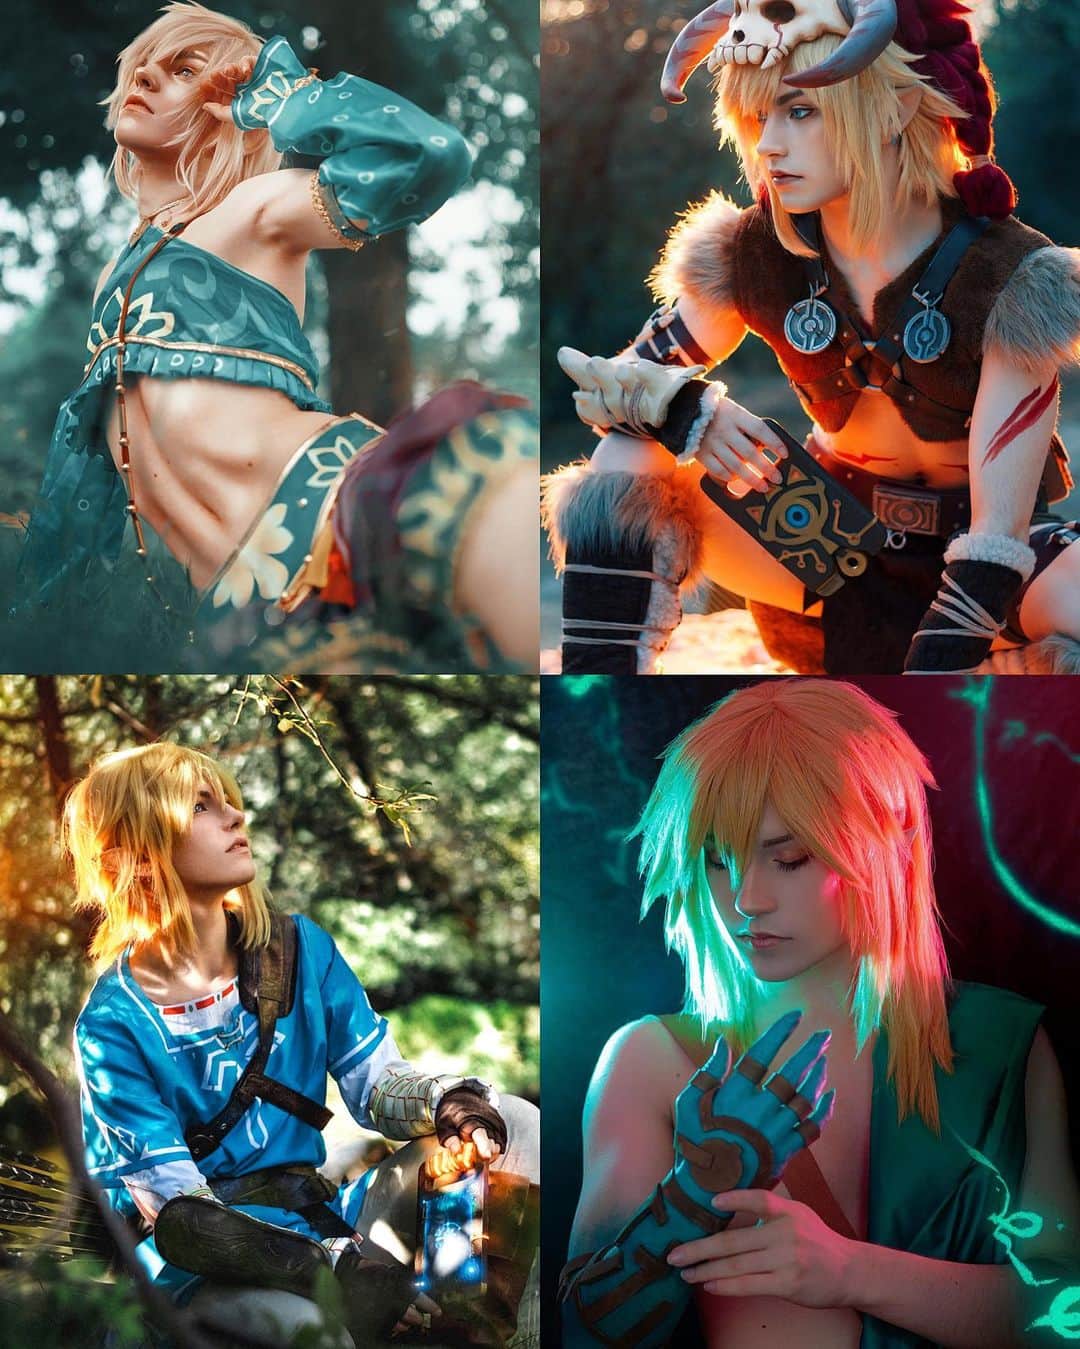 Geheのインスタグラム：「Zelda Tears of the Kingdom is almost here 🥹 man I'm emotional. Can't wait to see all the new outfits and want to cosplay them all lol- Which is your favorite that I've done and which new one would you like to see? 👁️👁️  PHOTOGRAPHERS: 1- @neolynnphotography  2- @pnkvirus  3- @peckphotograph  4- myself ✨👍 #totk #botw #zelda #cosplay #linkcosplay #tearsofthekingdom」